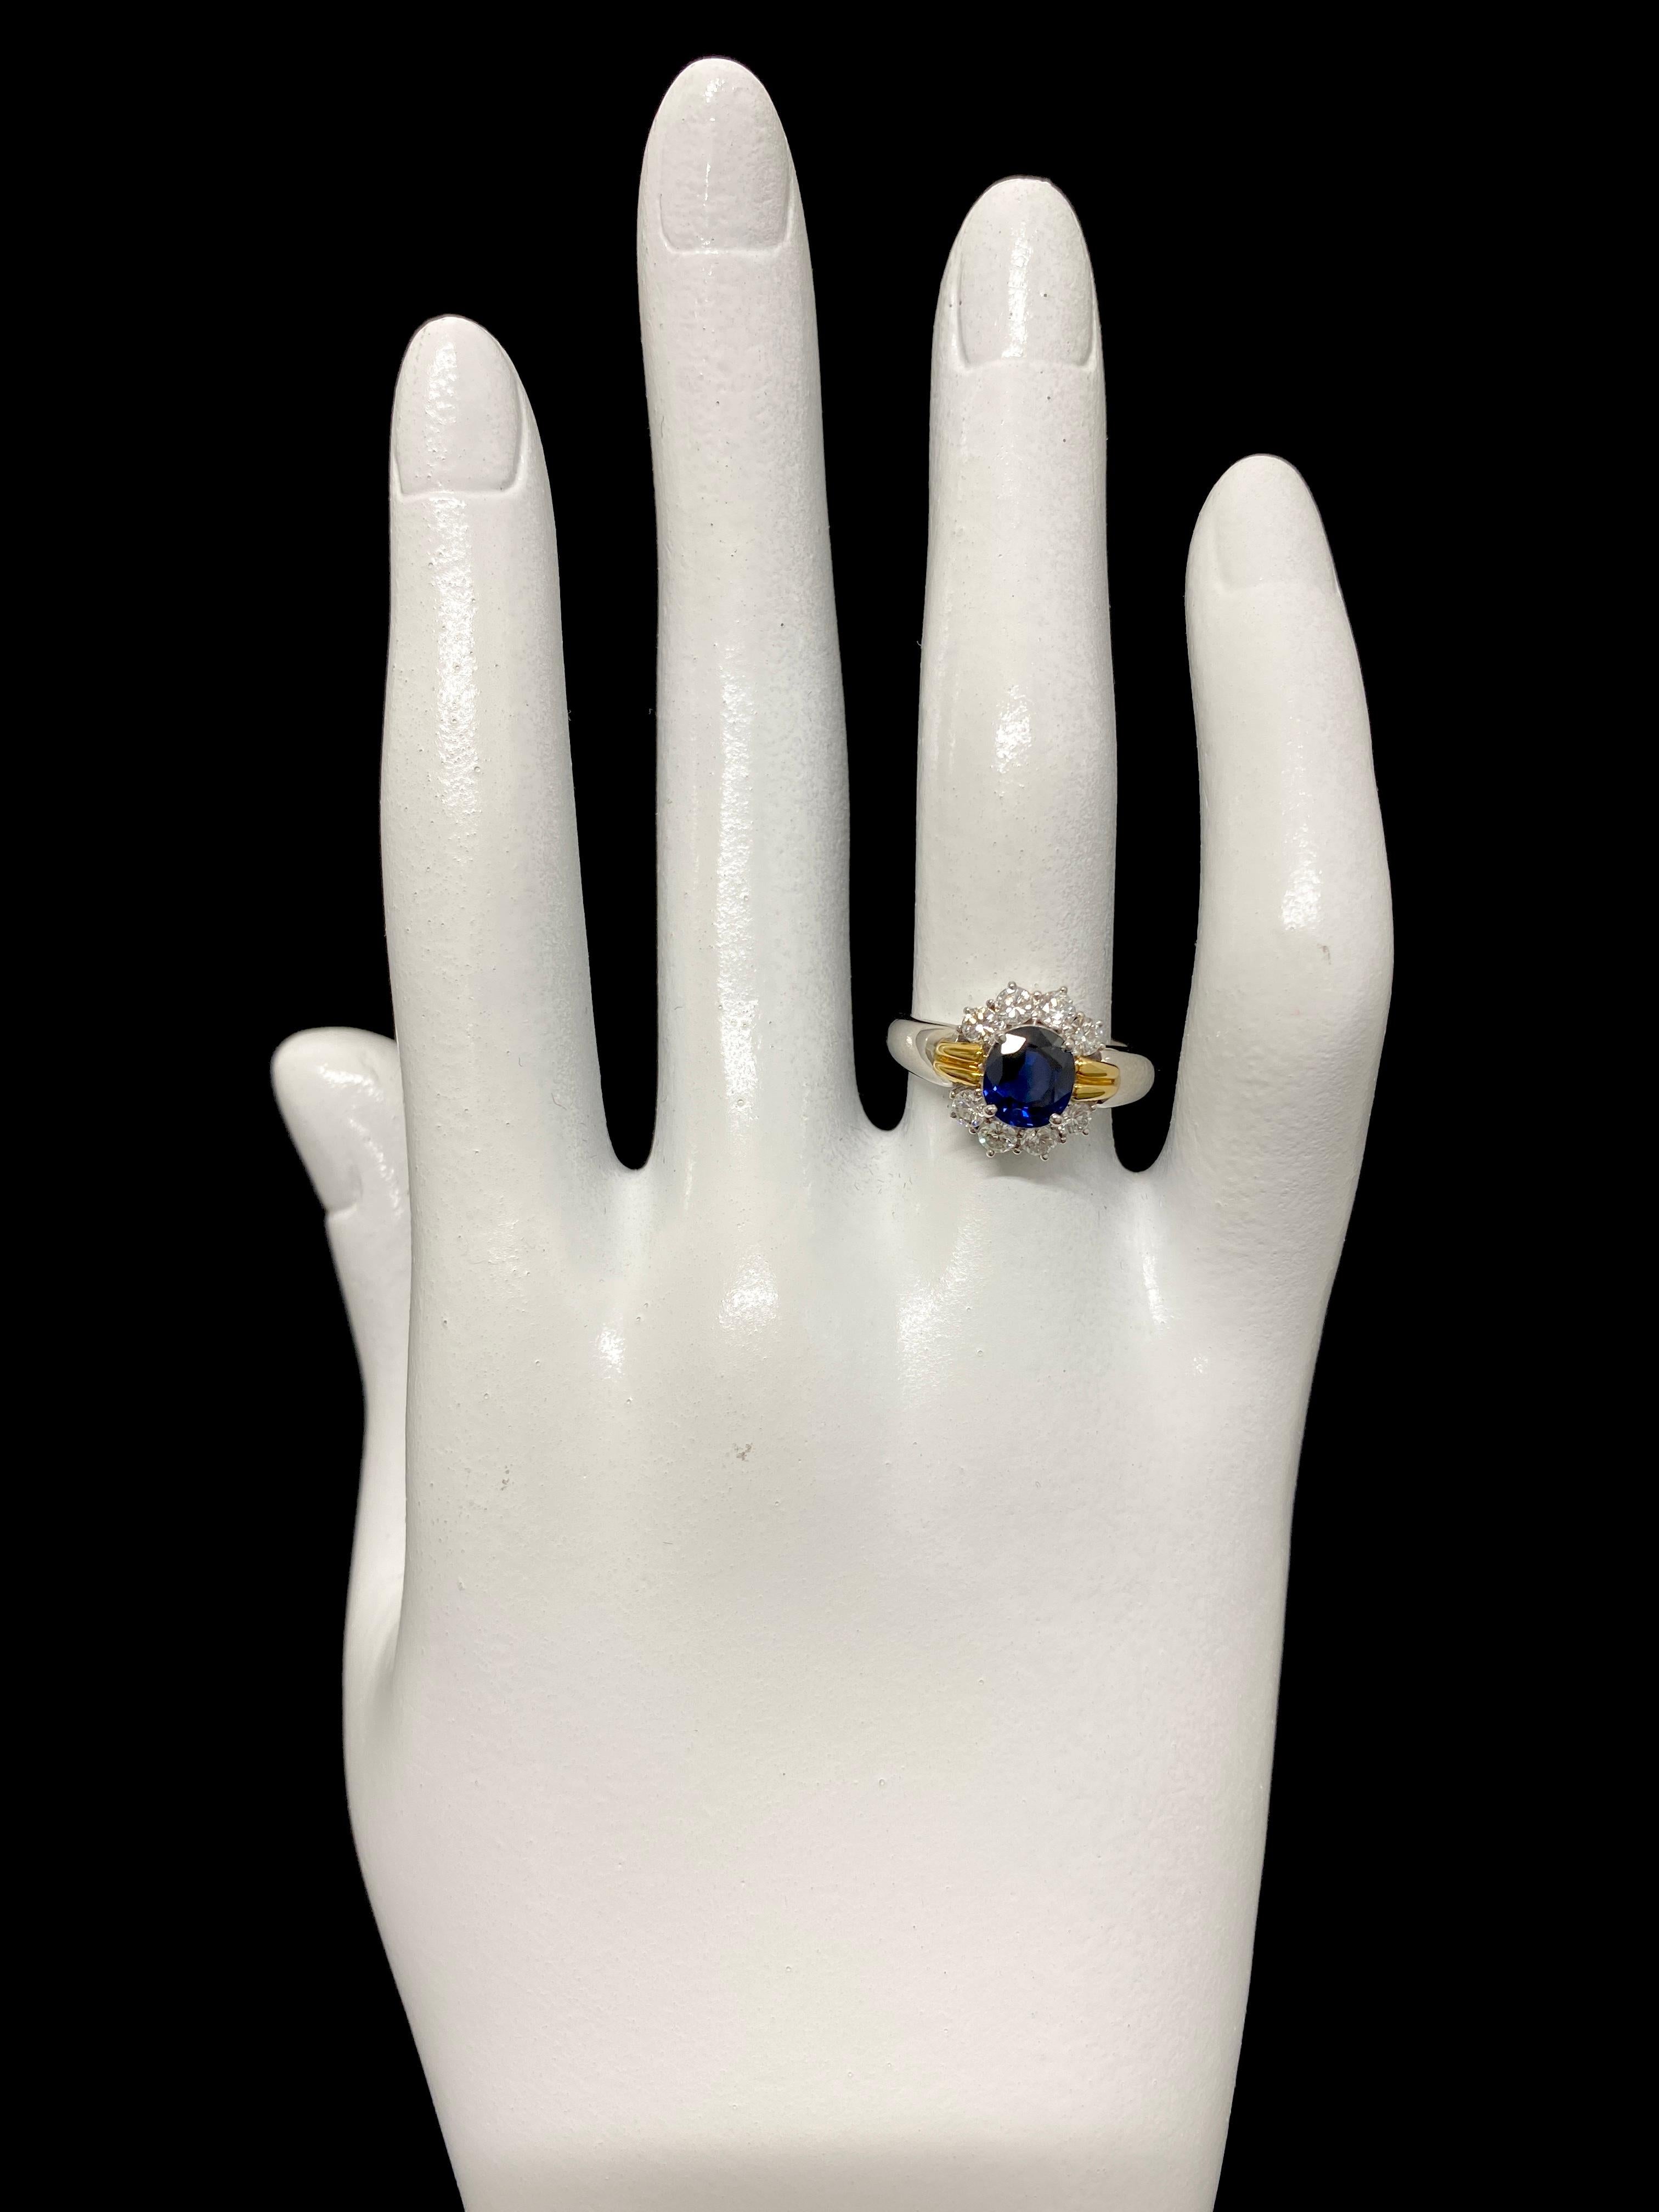 Women's 1.17 Carat Natural Sapphire and Diamond Ring set in Platinum and 18K Gold